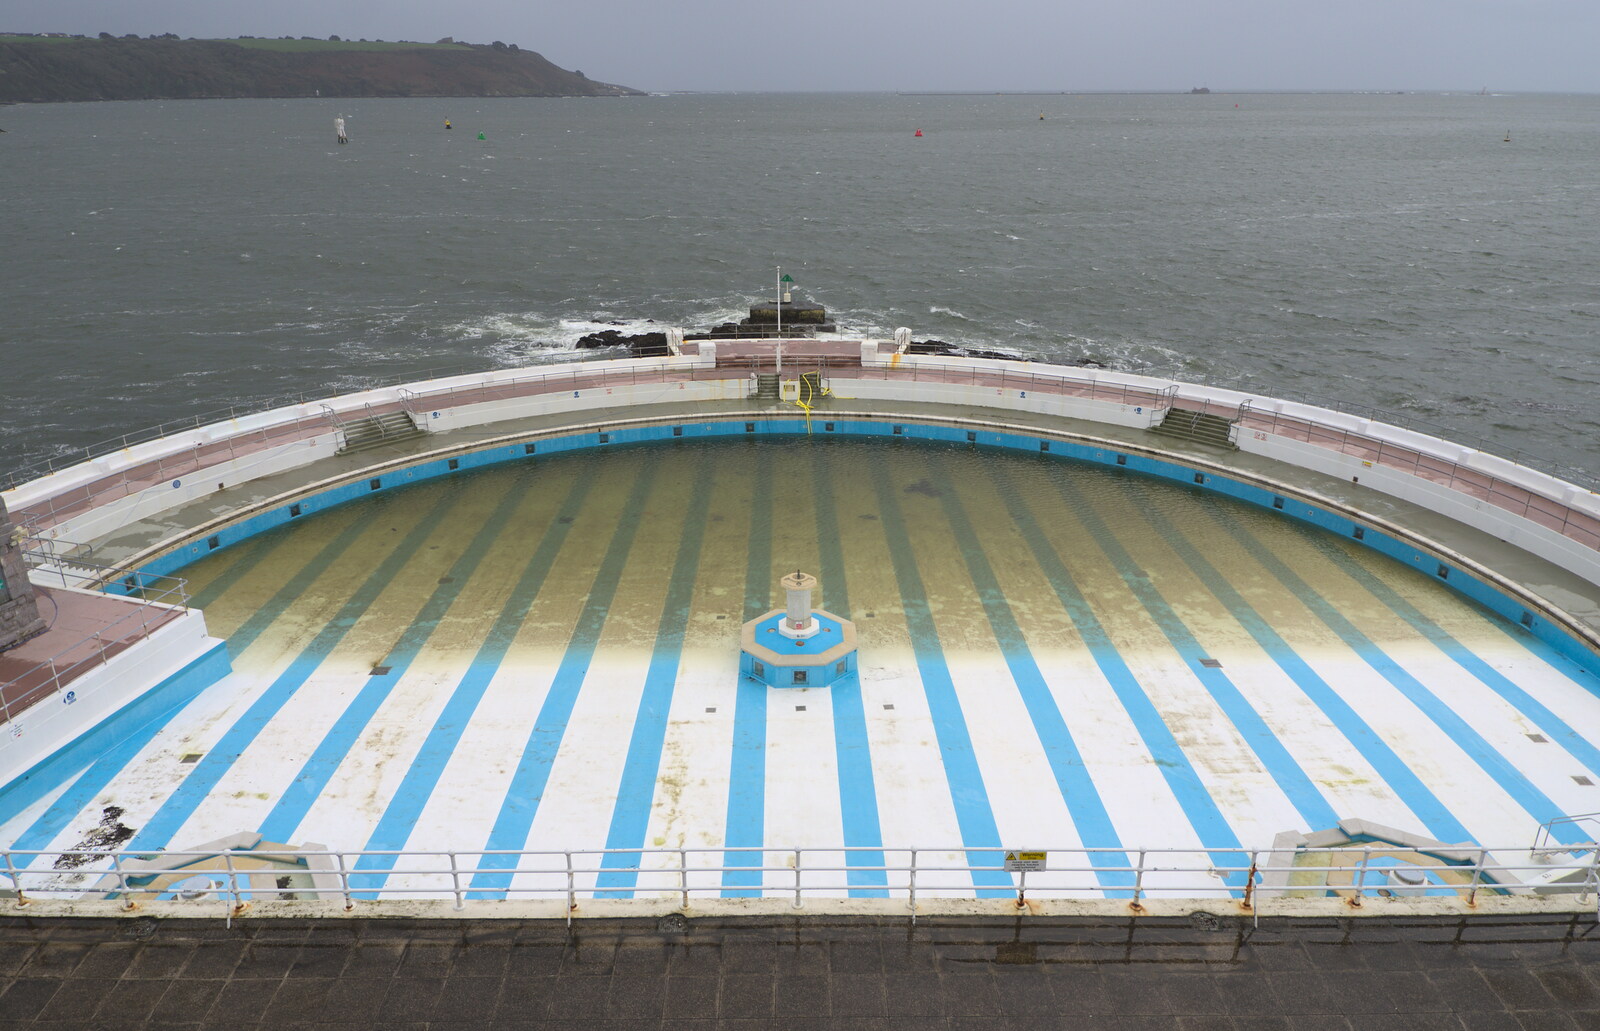 The stripey but derelict-looking Tinside Lido from A Few Days in Spreyton, Devon - 26th October 2013